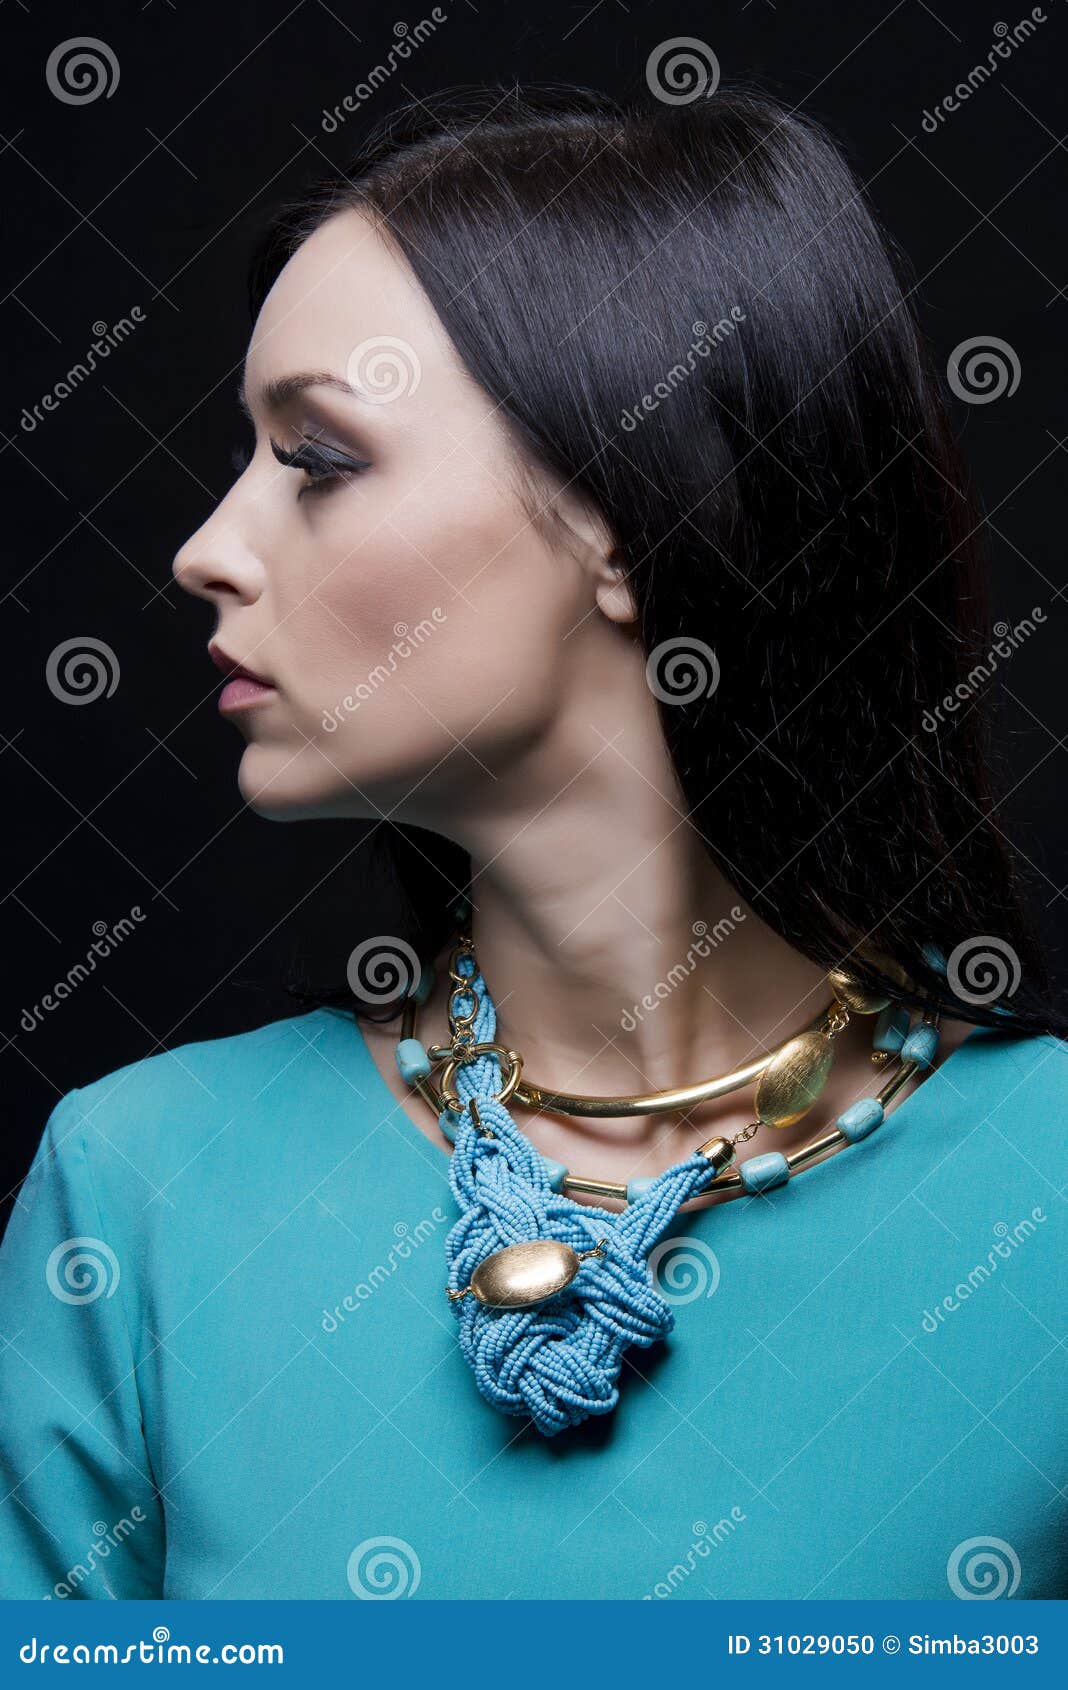 profile of beautiful fashionable woman wearing cyan clothes and jewellery